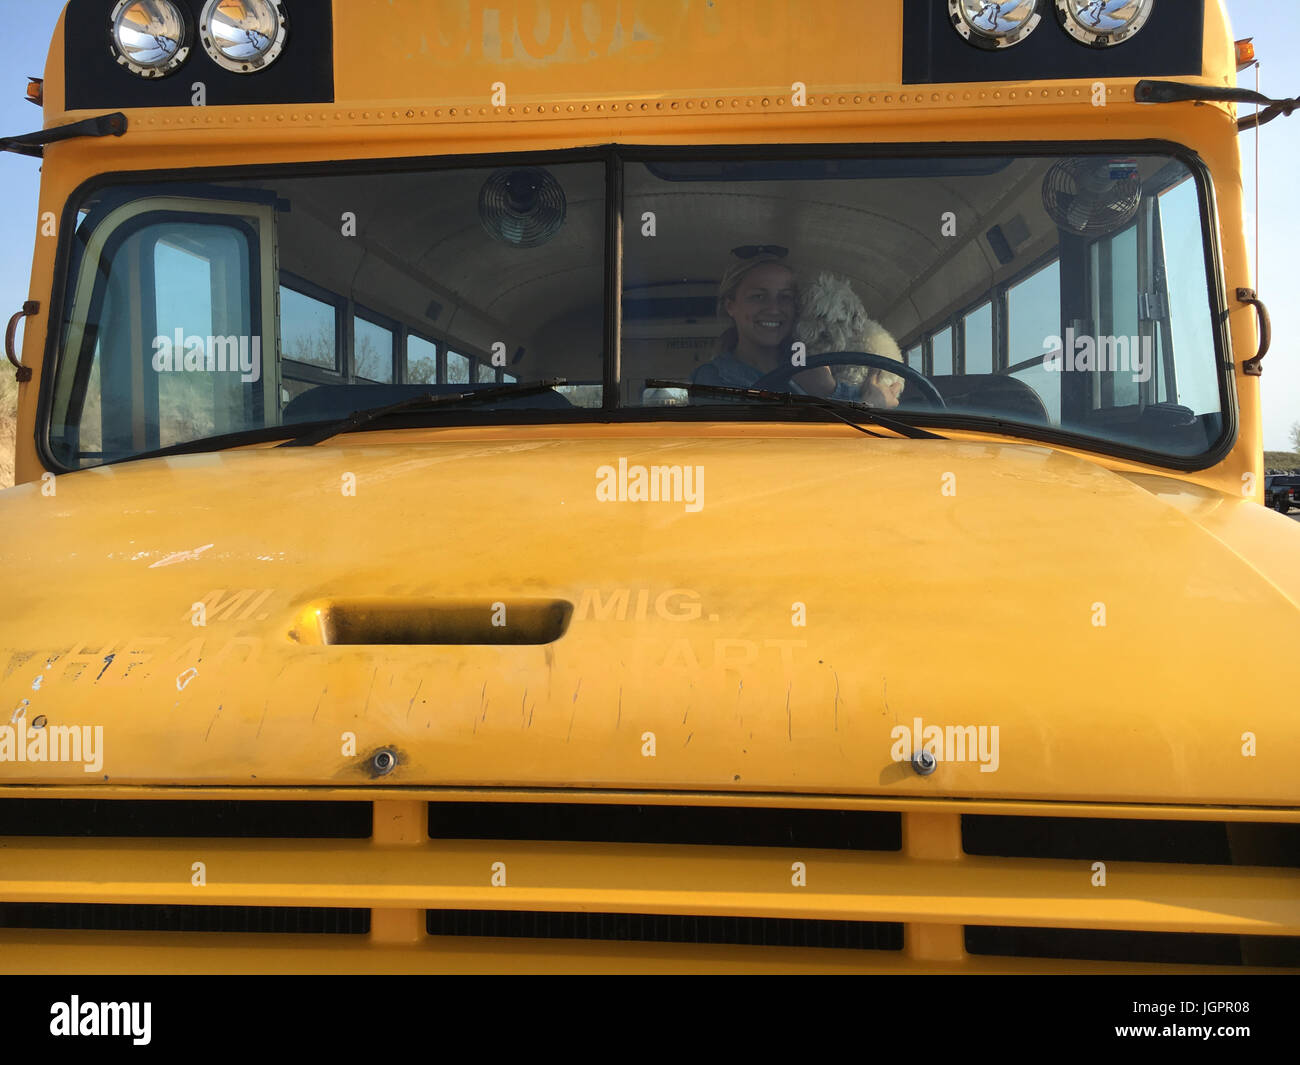 maximum weight limit on school bus driver seat